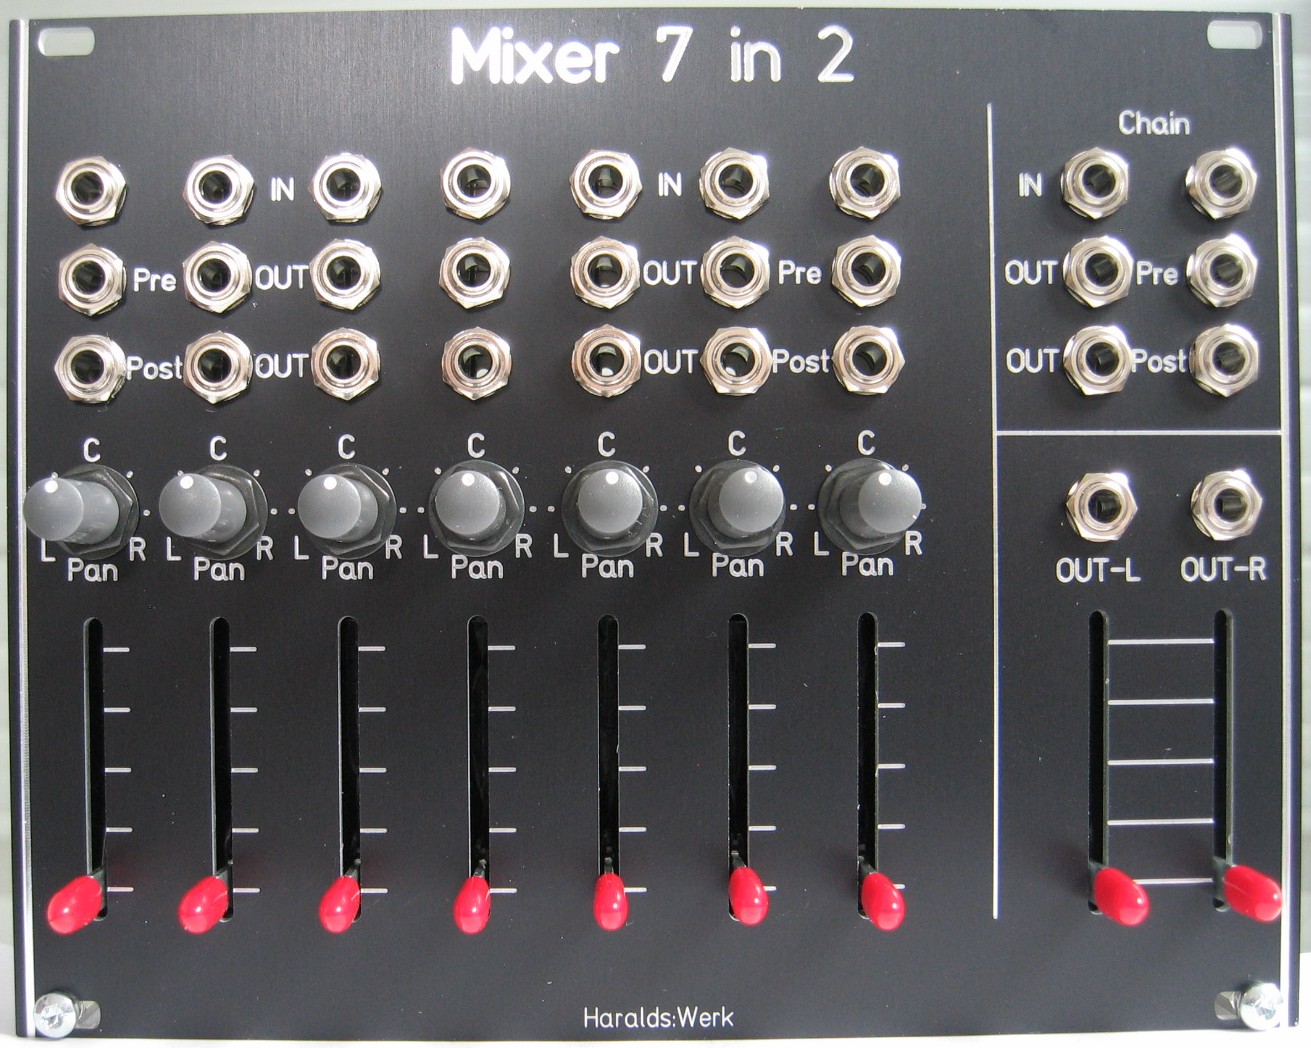 Mixer 7 in 2 front view